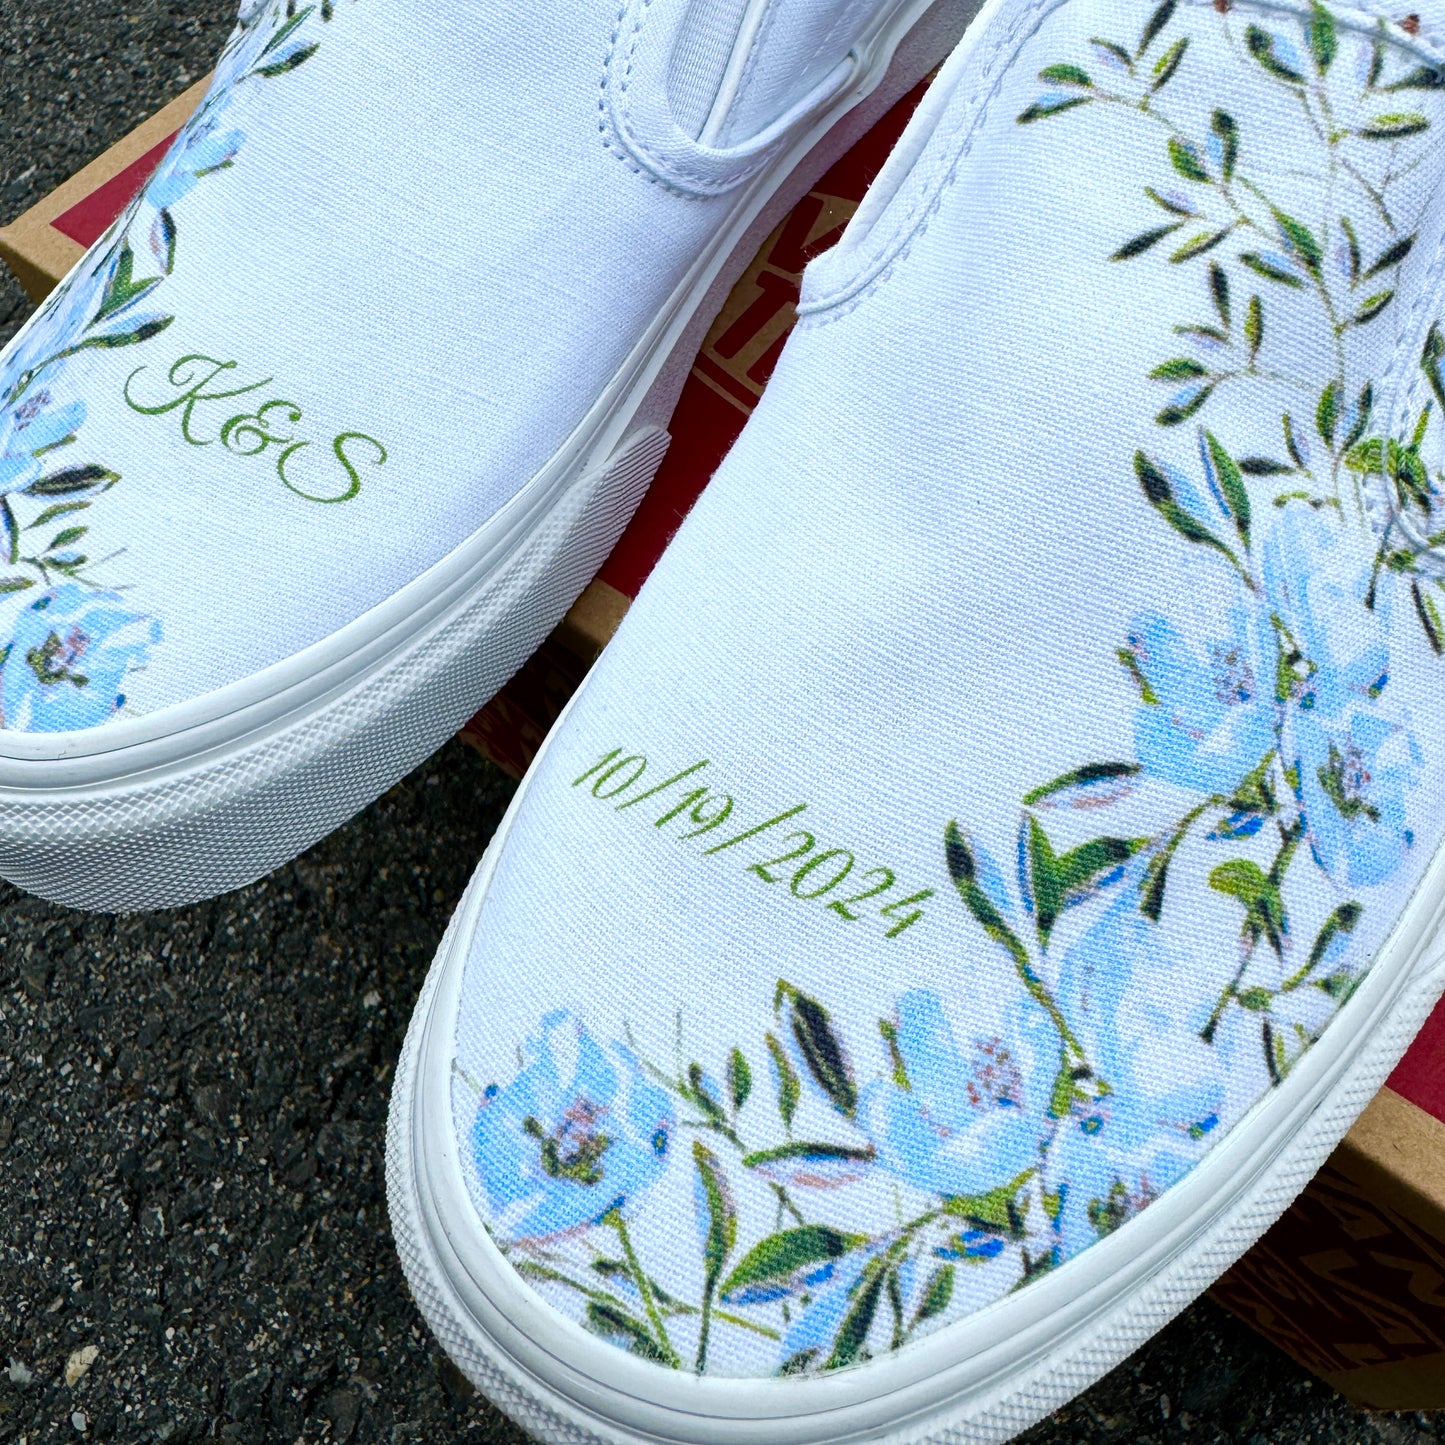 Light Blue Flower - Wedding Custom Slip On Vans Bridal Shoes Wedding Sneakers Wedding Shoes for Bride Brides Maids and Maid of Honor